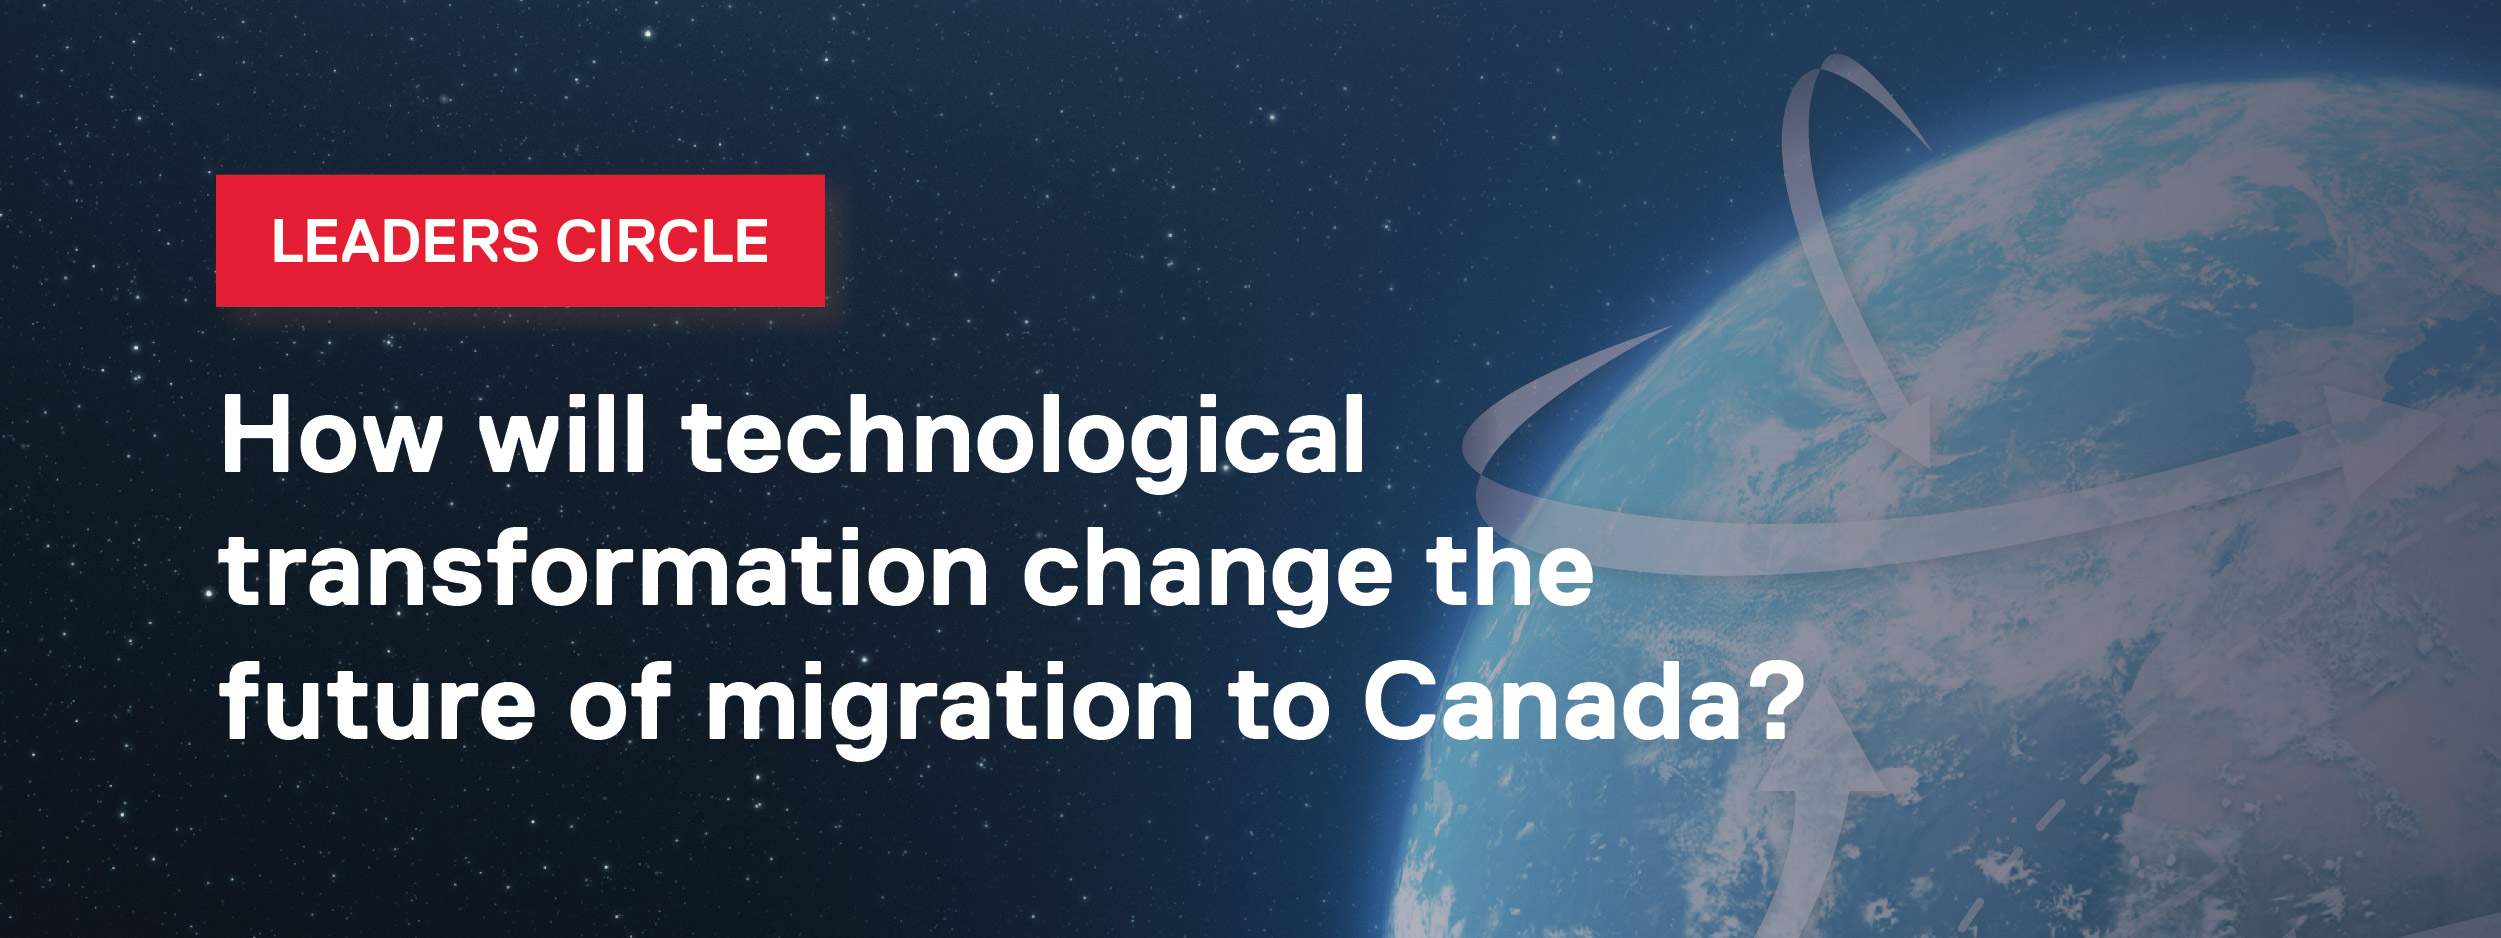 How will technological transformation change the future of migration to Canada? banner